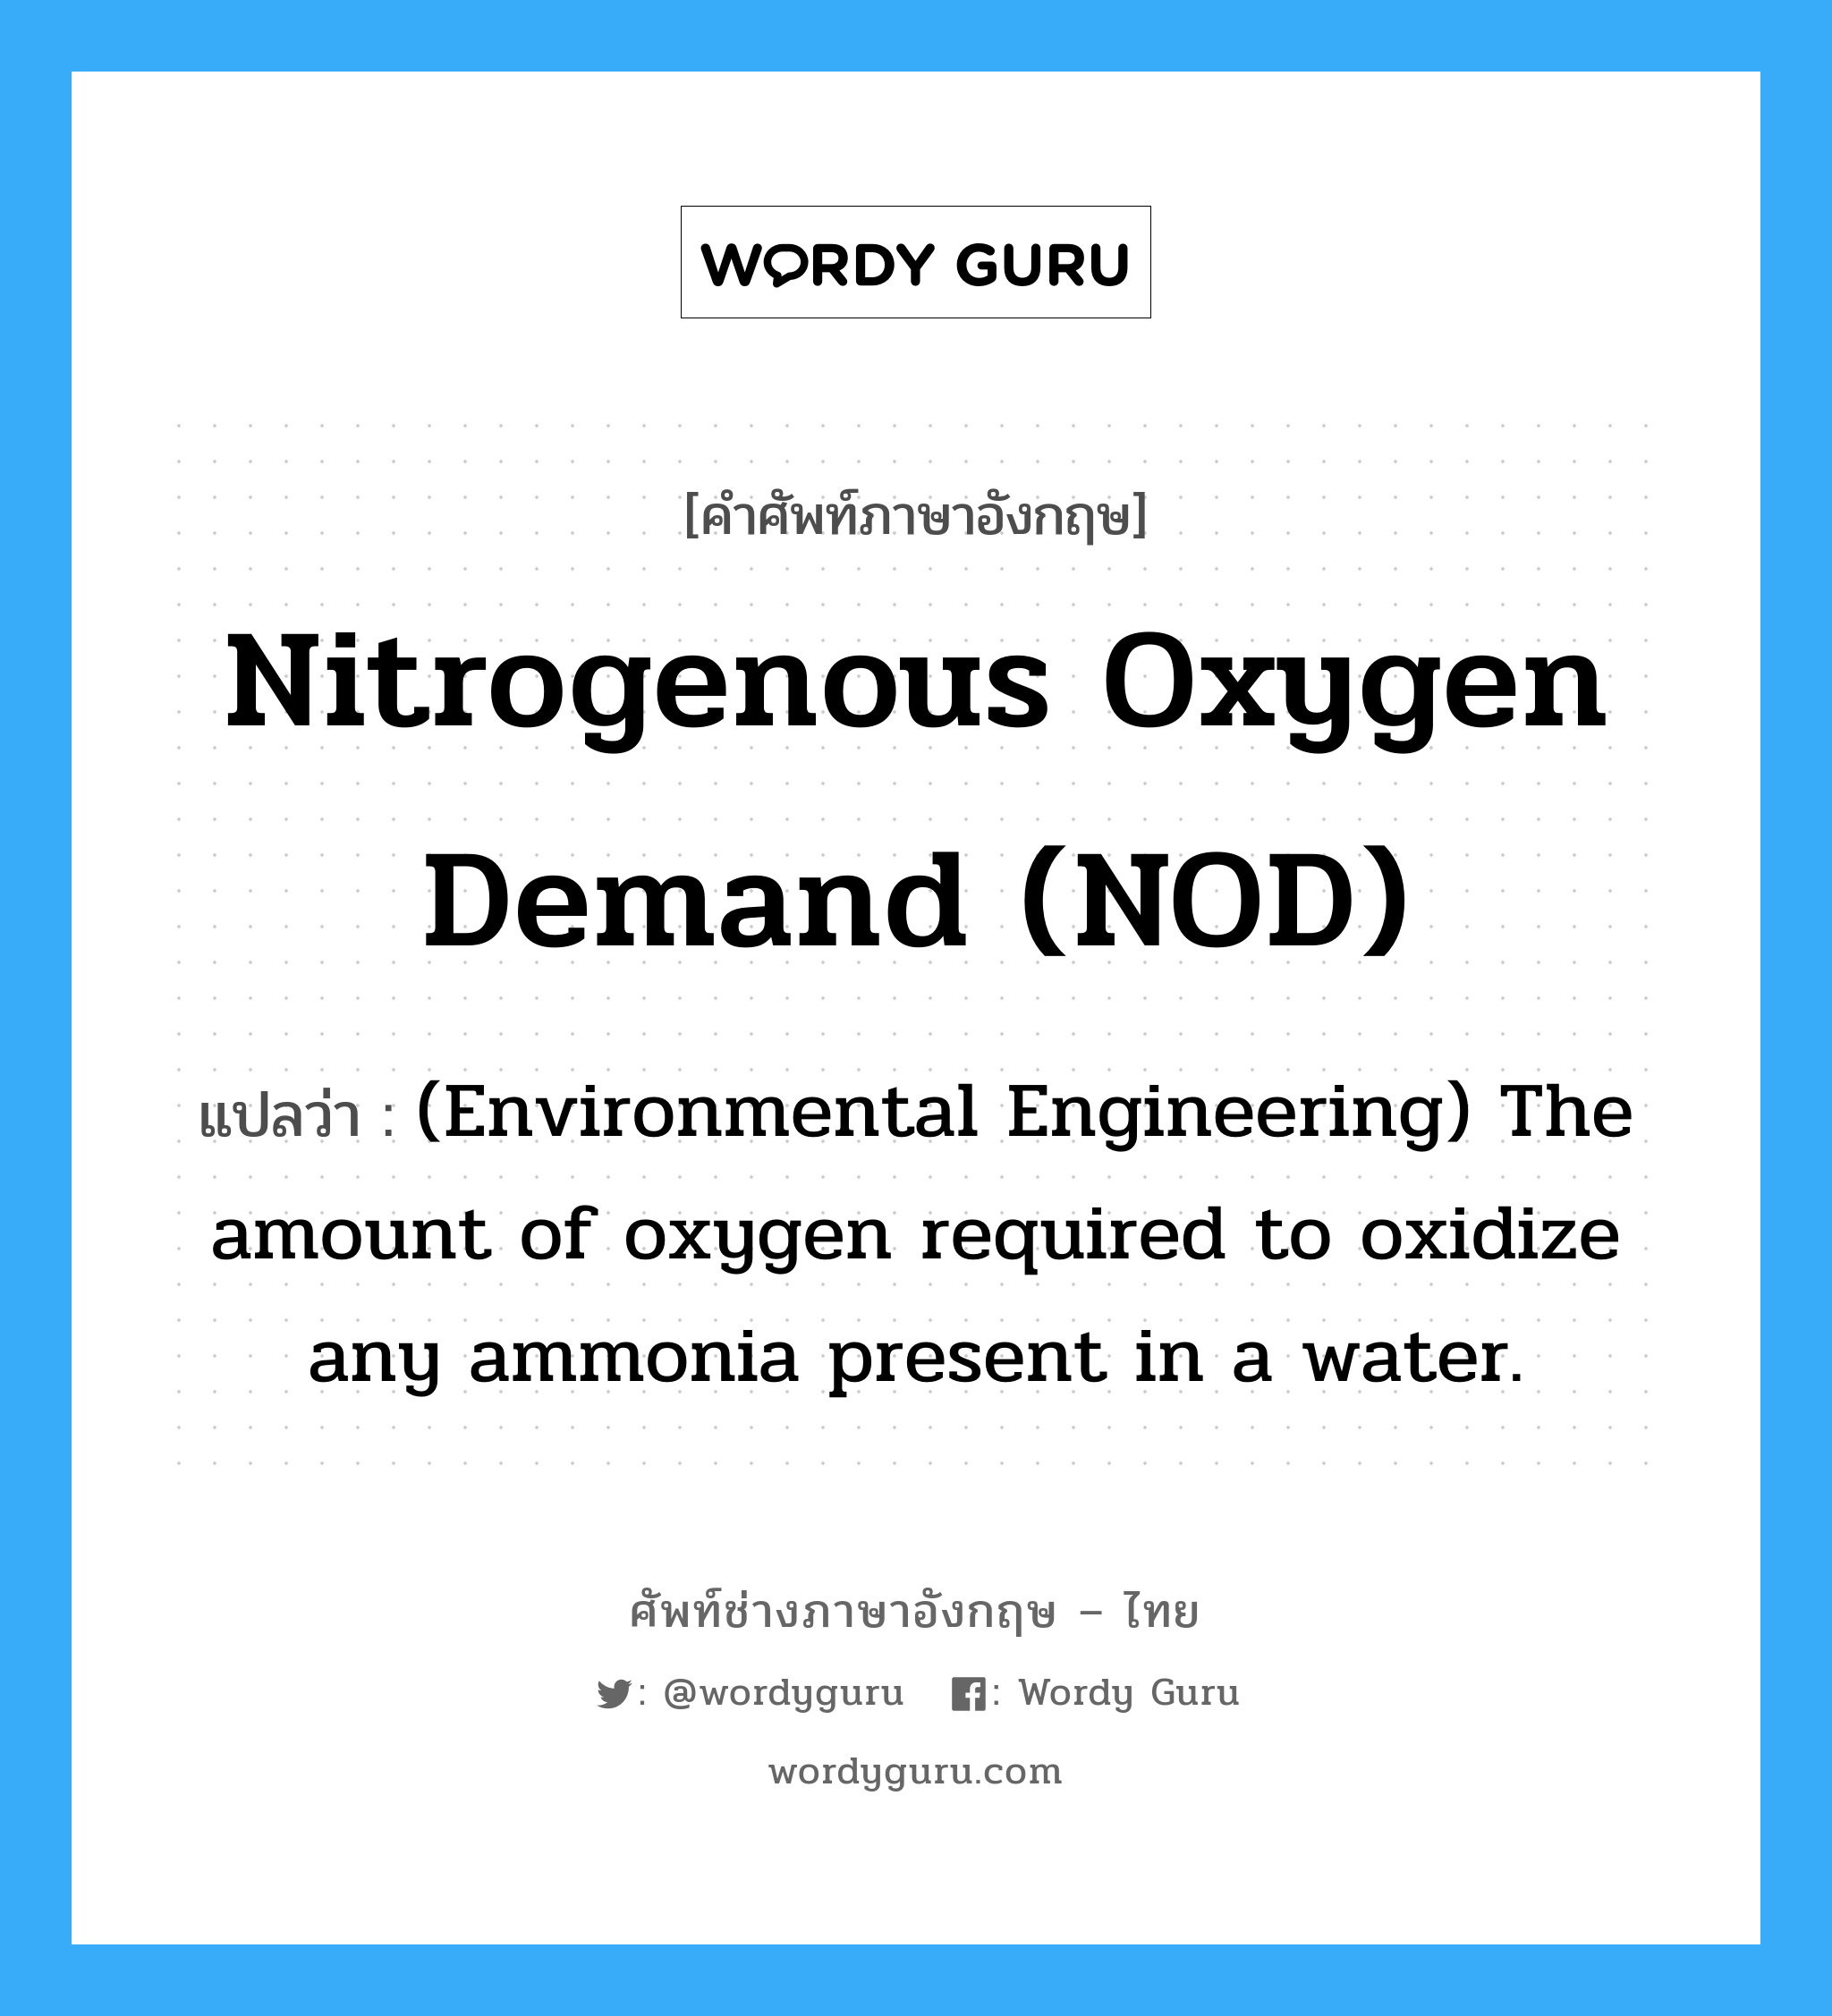 Nitrogenous oxygen demand (NOD) แปลว่า?, คำศัพท์ช่างภาษาอังกฤษ - ไทย Nitrogenous oxygen demand (NOD) คำศัพท์ภาษาอังกฤษ Nitrogenous oxygen demand (NOD) แปลว่า (Environmental Engineering) The amount of oxygen required to oxidize any ammonia present in a water.